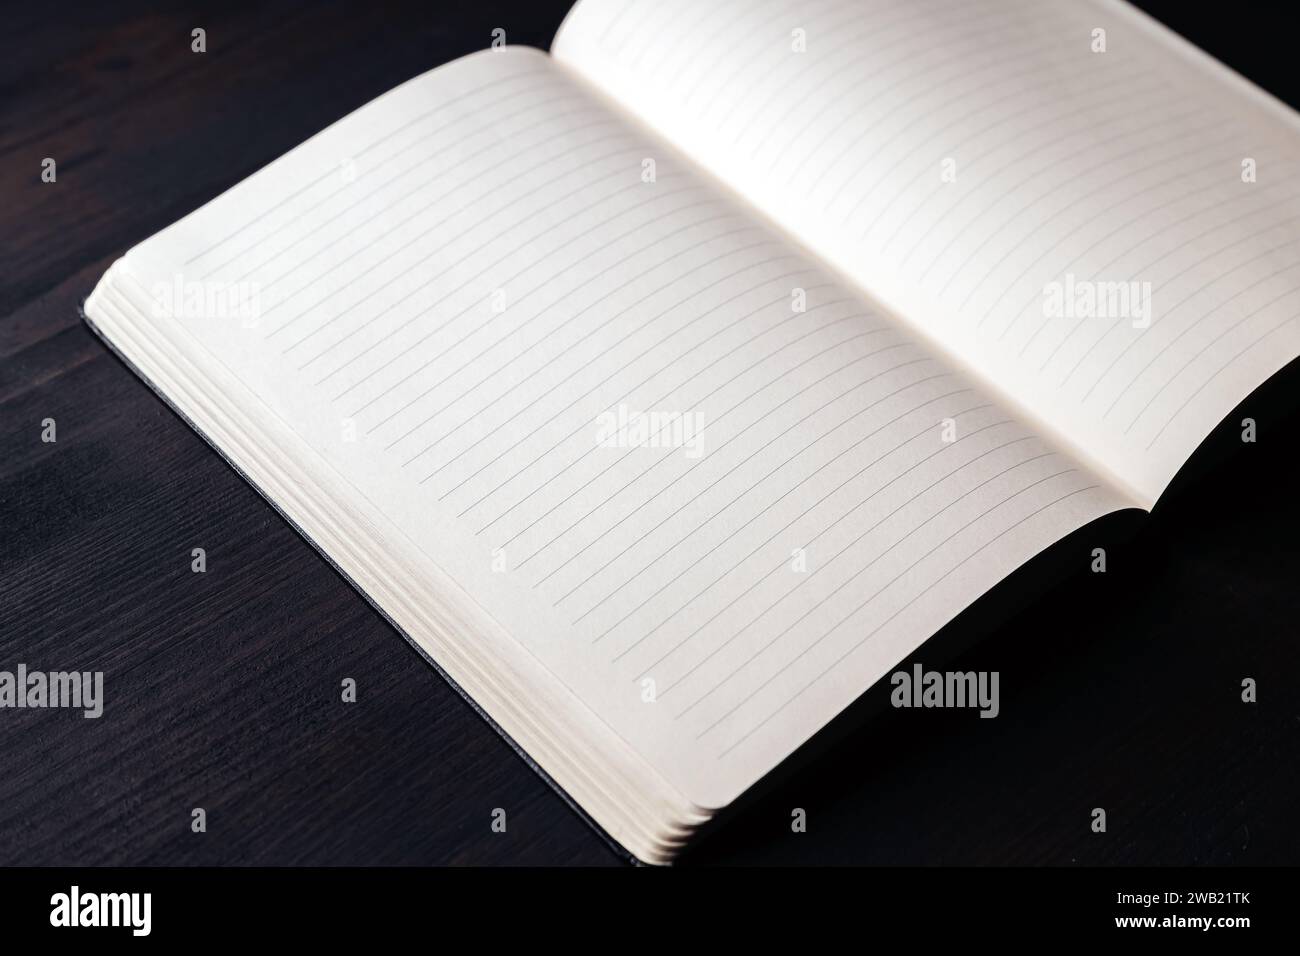 Open notebook on office desk with pencil, mockup copy space on blank pages Stock Photo